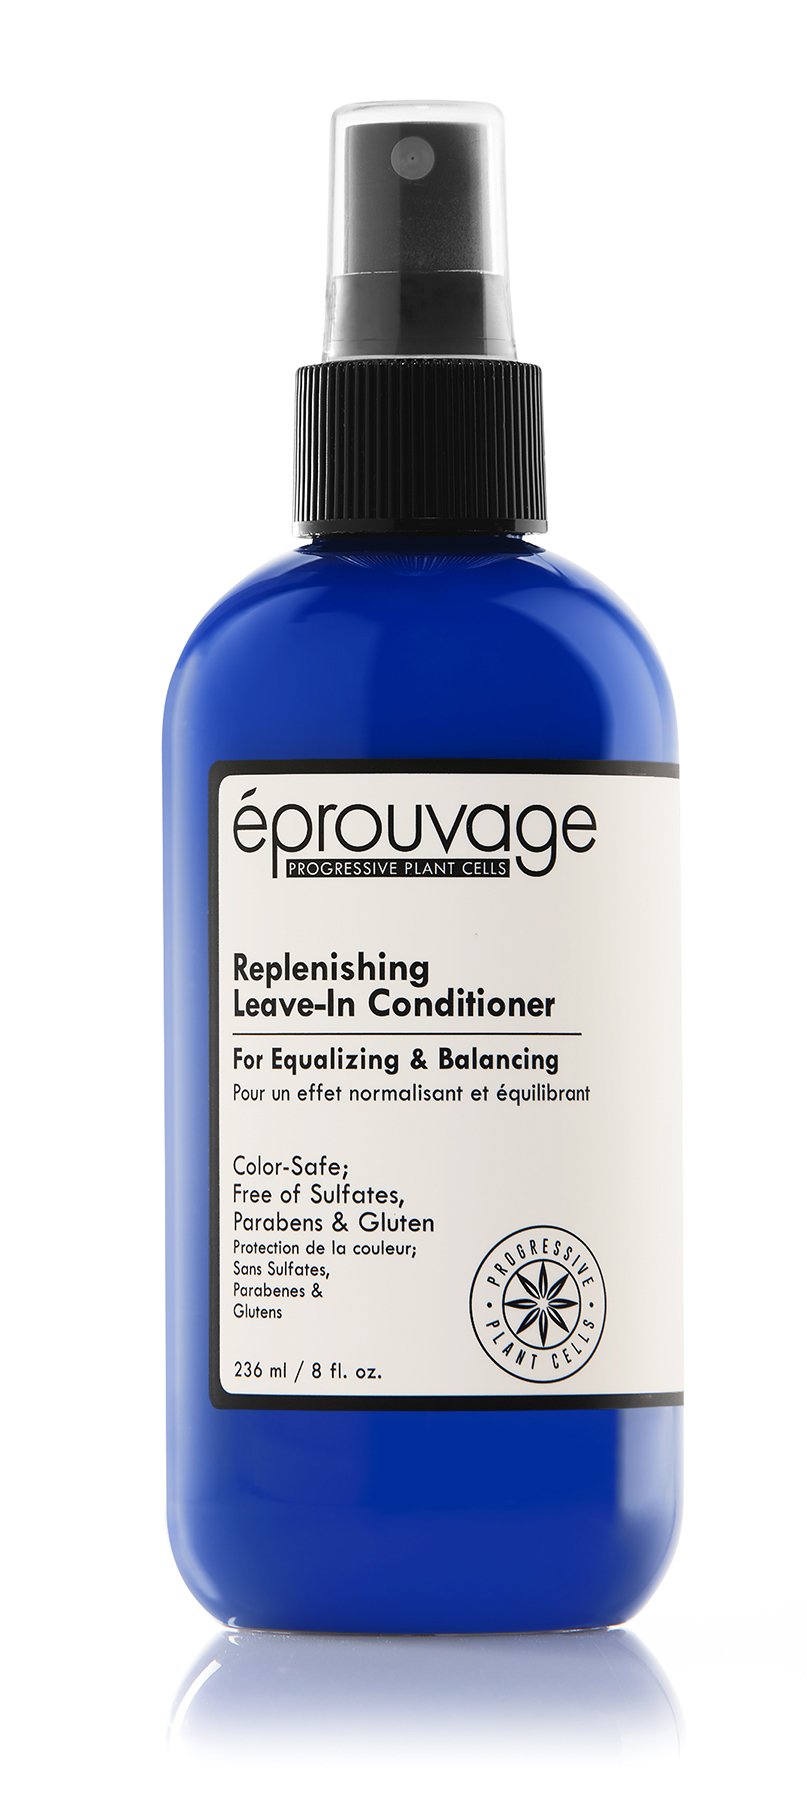 Macadamia Professional Eprouvage Replenishing Leave-In Conditioner, 8 Fl oz